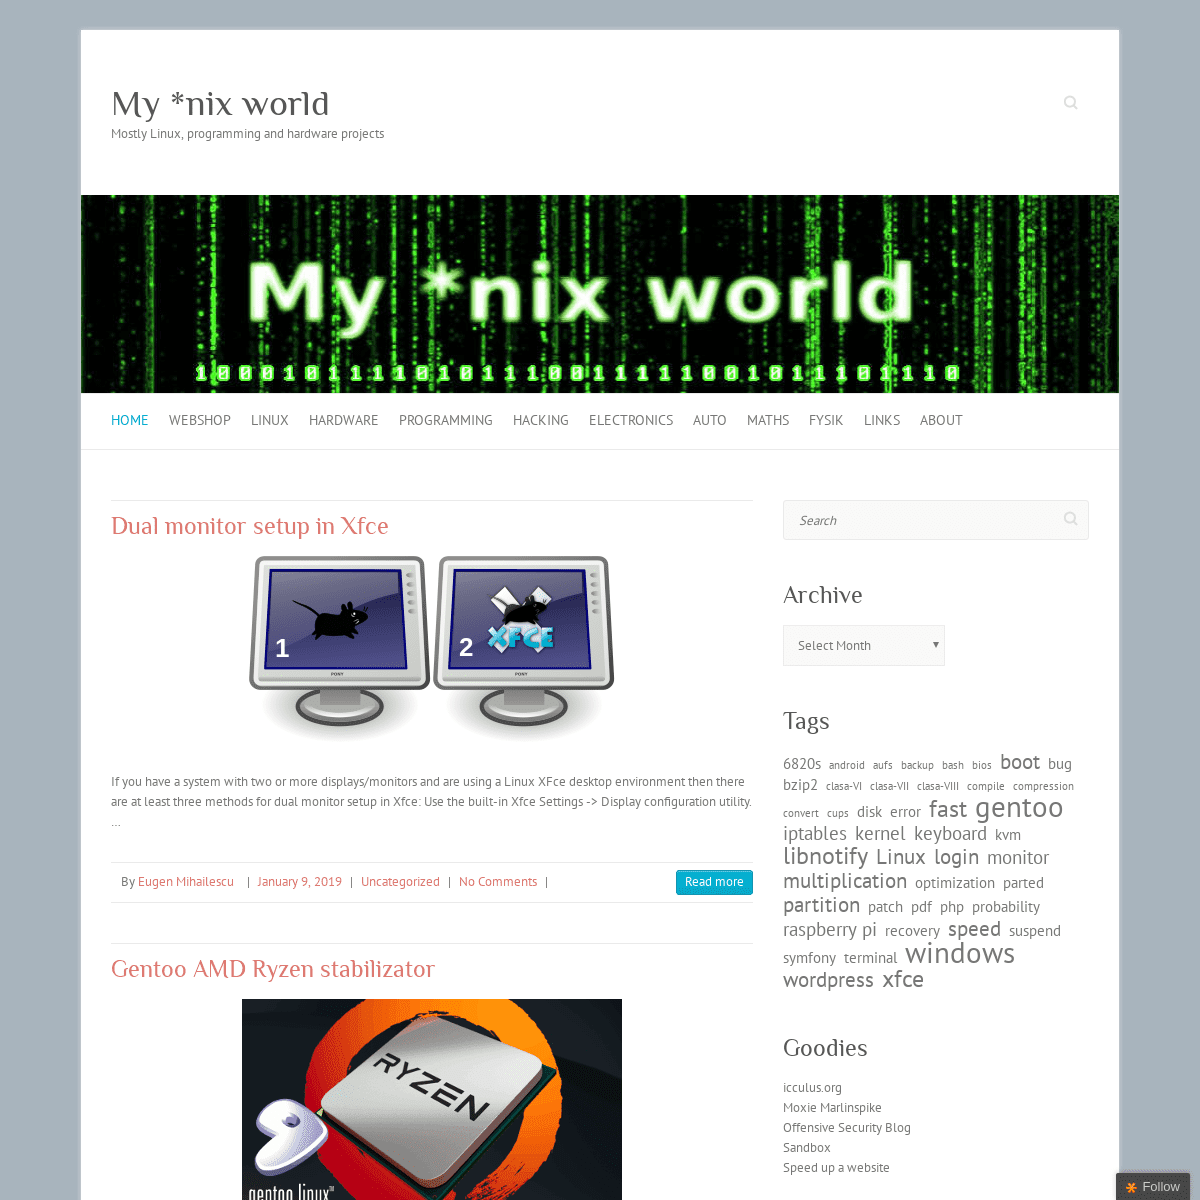 My *nix world - Mostly Linux, programming and hardware projects